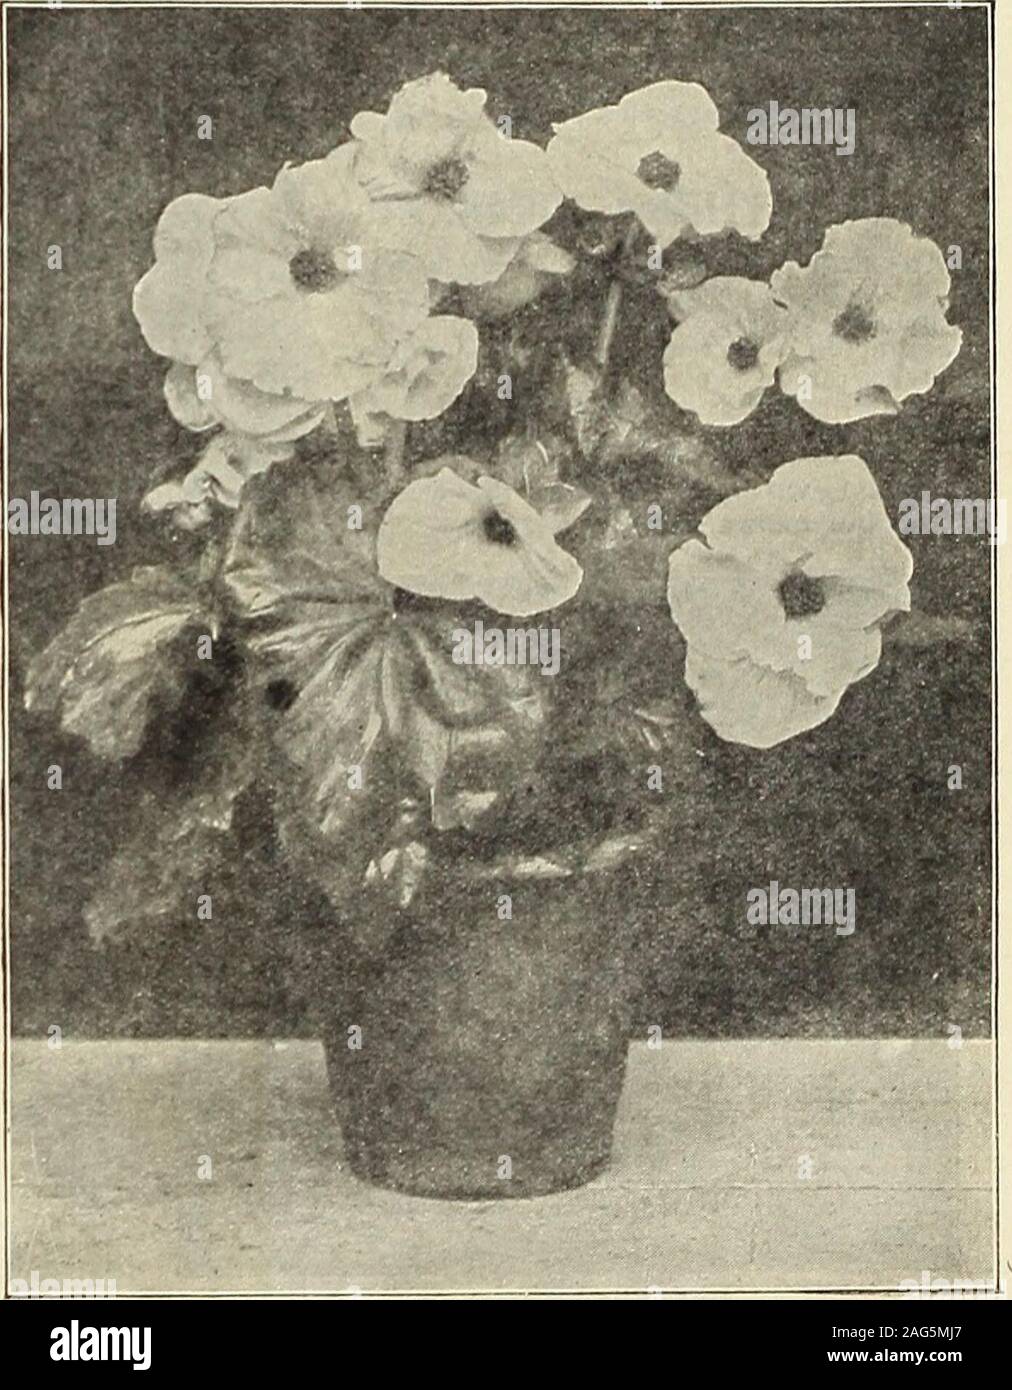 . Rawson's garden manual / W.W. Rawson & Co.. recent years has the Ameri-can florist recognized the value of thisflower, and now they are grown here, wemay say, by the million. Plant in Mayout-of-doors. Single Caen (the Giant French, orPoppy-flowered Anemone). Finestmi.xed. 21 is per doz., 5i per 100, S7per 1,000. Single Coronaria. Finest mixed. 15 cts. per doz.. Si per 100, Ss per 1,000.Single Blue. Bright color. 20 cts. per &lt;l&lt;jz., Si per 100, $7-50 per 1,000.Single Scarlet. Very showy. 20 cts. per doz., Si per 100, S7-50 per 1,000.Single White (The Bride). Pure snowy white. 20 cts. pe Stock Photo